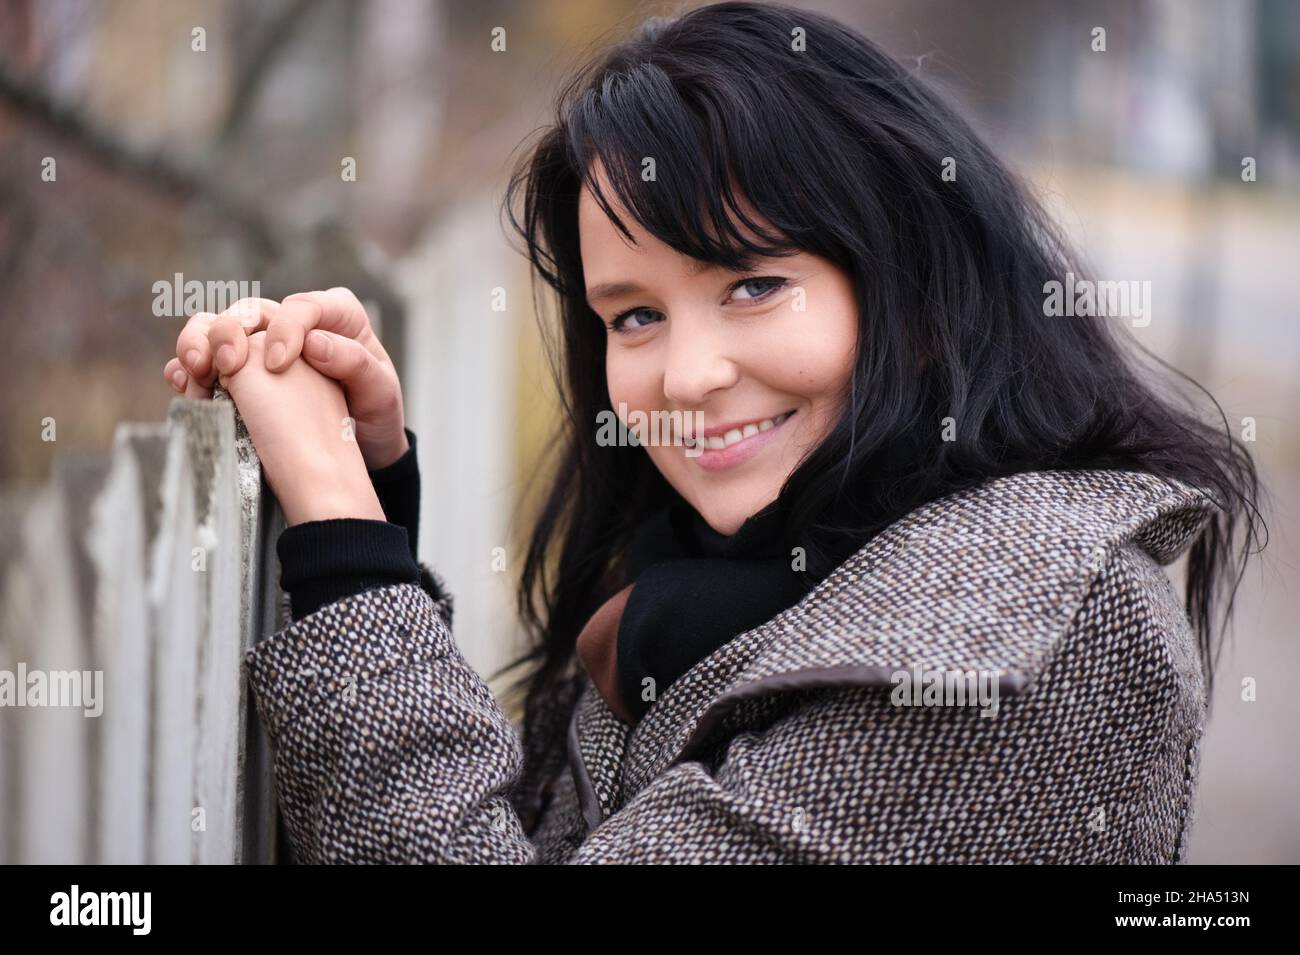 Smiling young woman in jacket standing beside old picket fence. Selective focus and shallow depth of field. Stock Photo